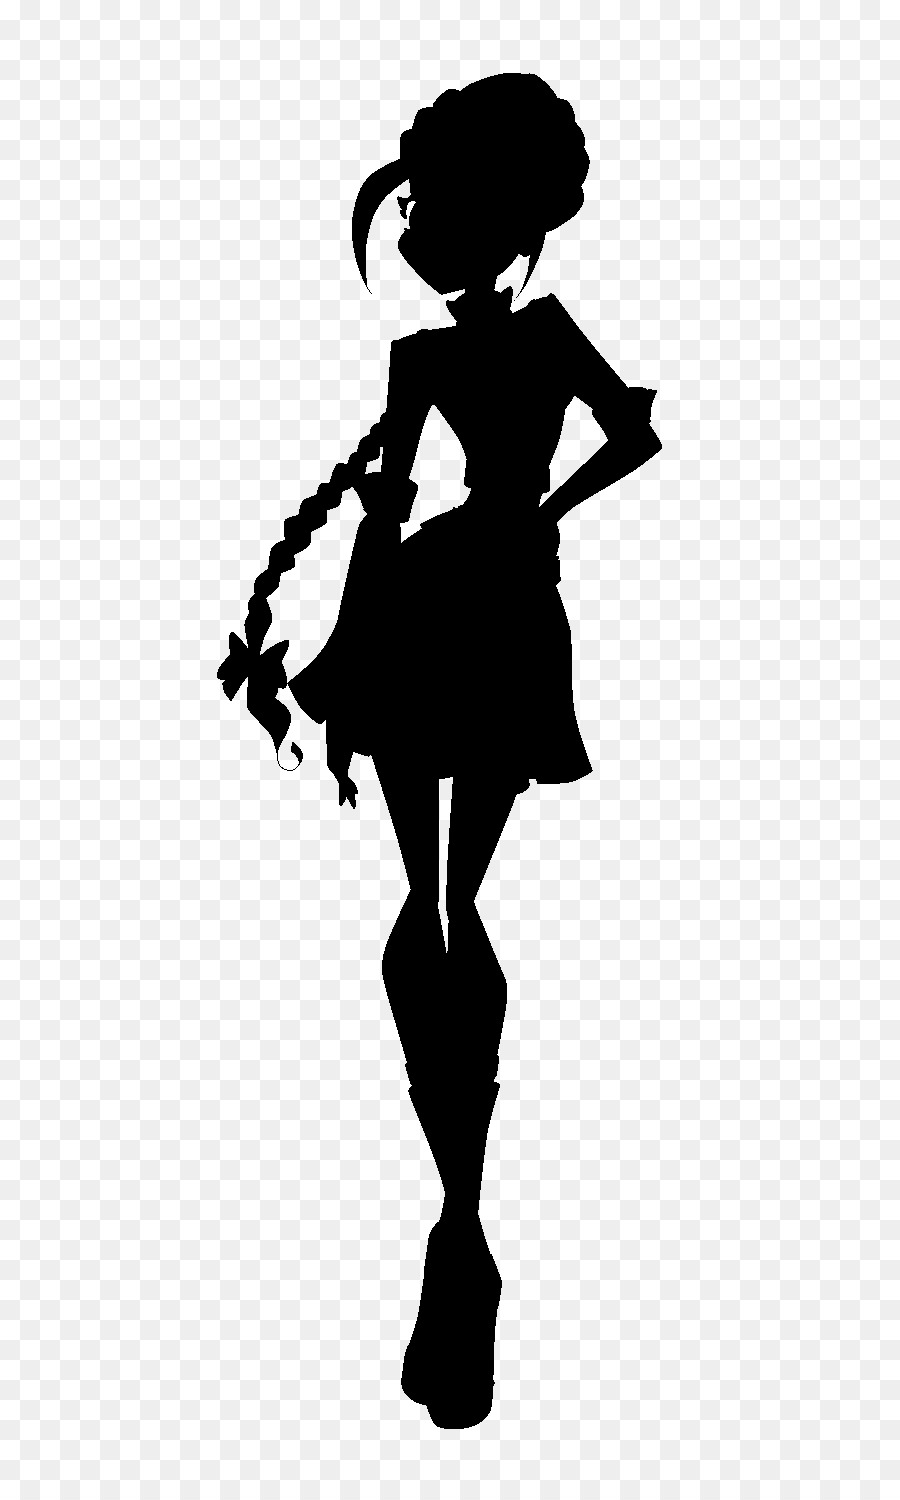 Shoe Illustration Character Silhouette Fiction -  png download - 847*1500 - Free Transparent Shoe png Download.